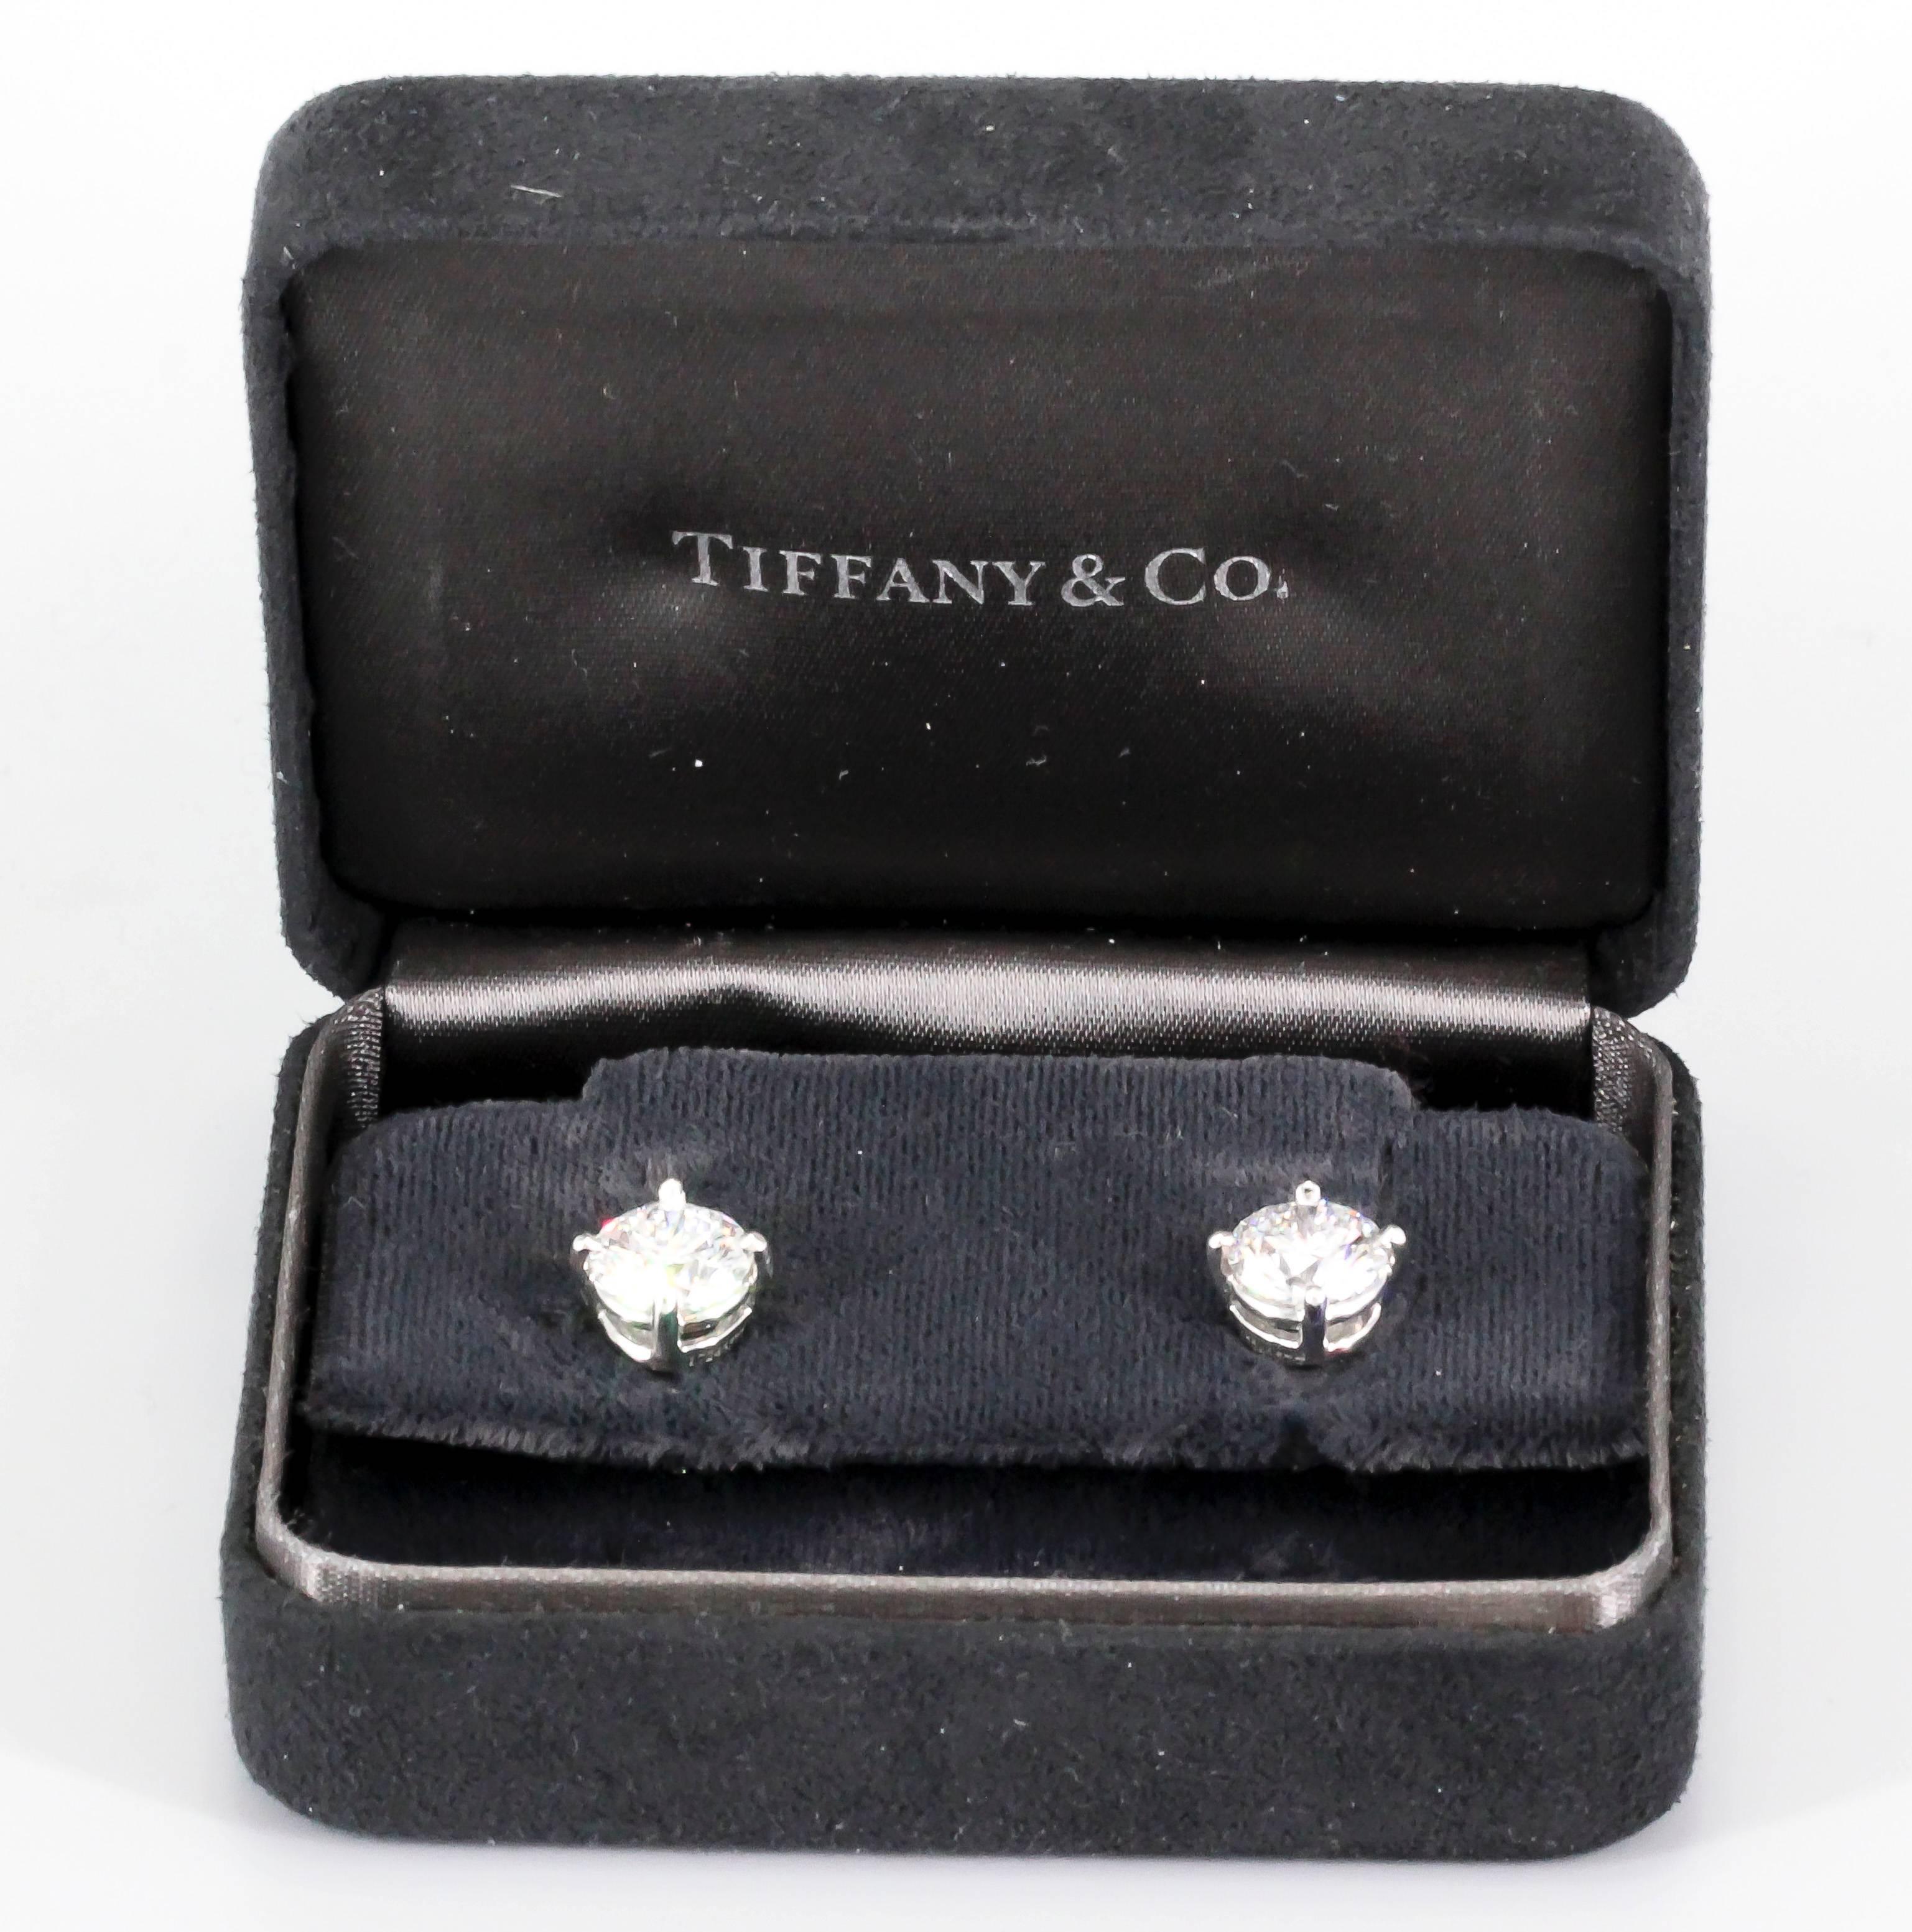 Important diamond and platinum studs by Tiffany & Co. They feature two very high grade stones, each with Excellent cut, polish, and symmetry;  both E color: one 2.32cts VS1 clarity, the other 2.31cts VVS2 clarity, total carat weight of 4.63 carats.